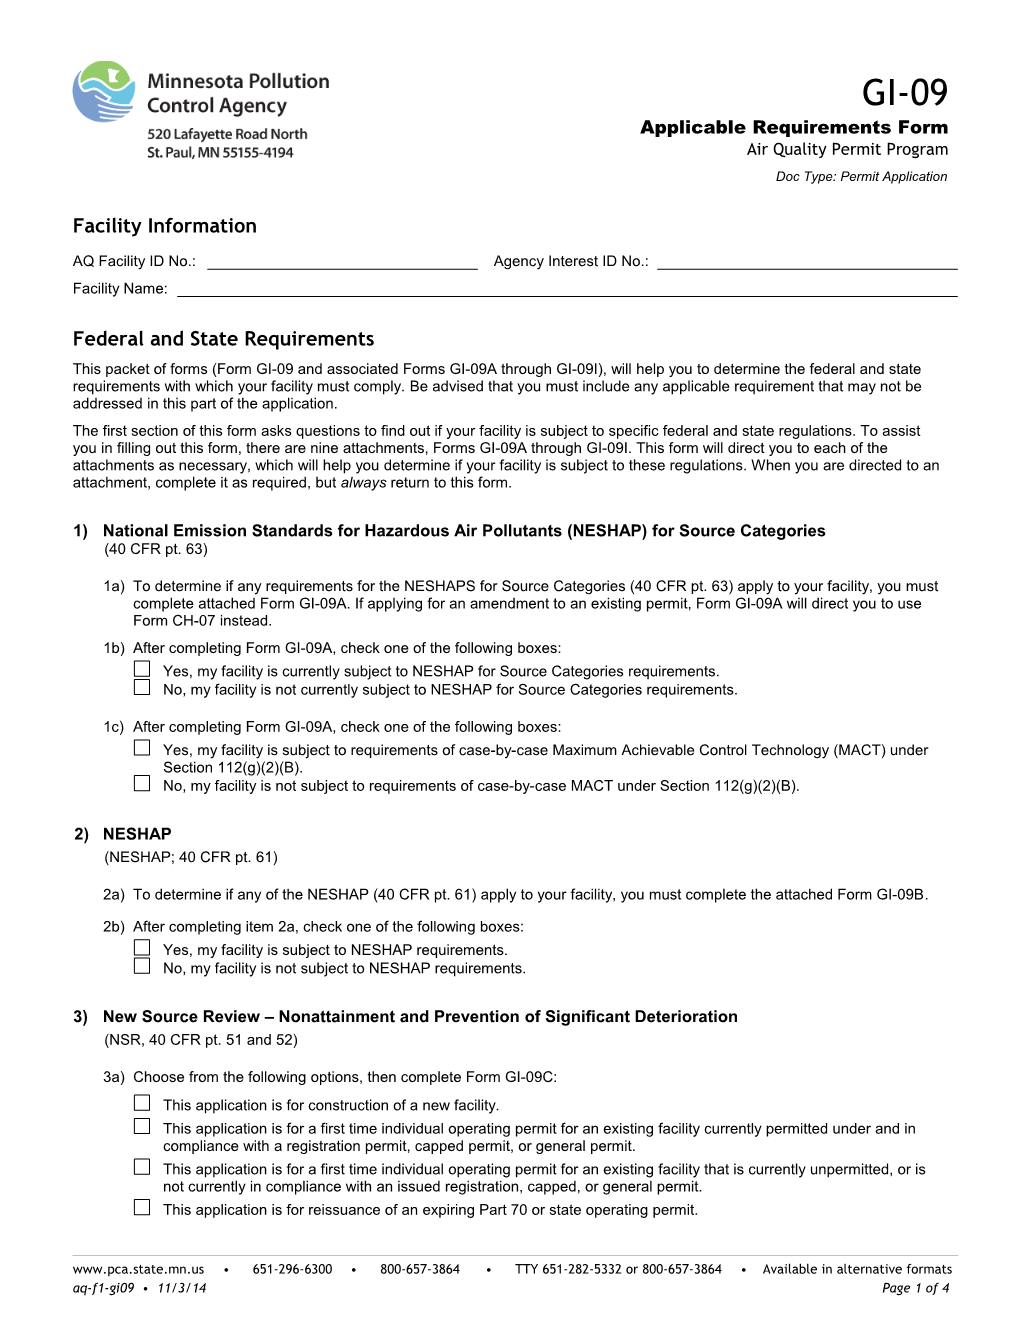 GI-09 Applicable Requirements Form - Air Quality Permit Section - Form